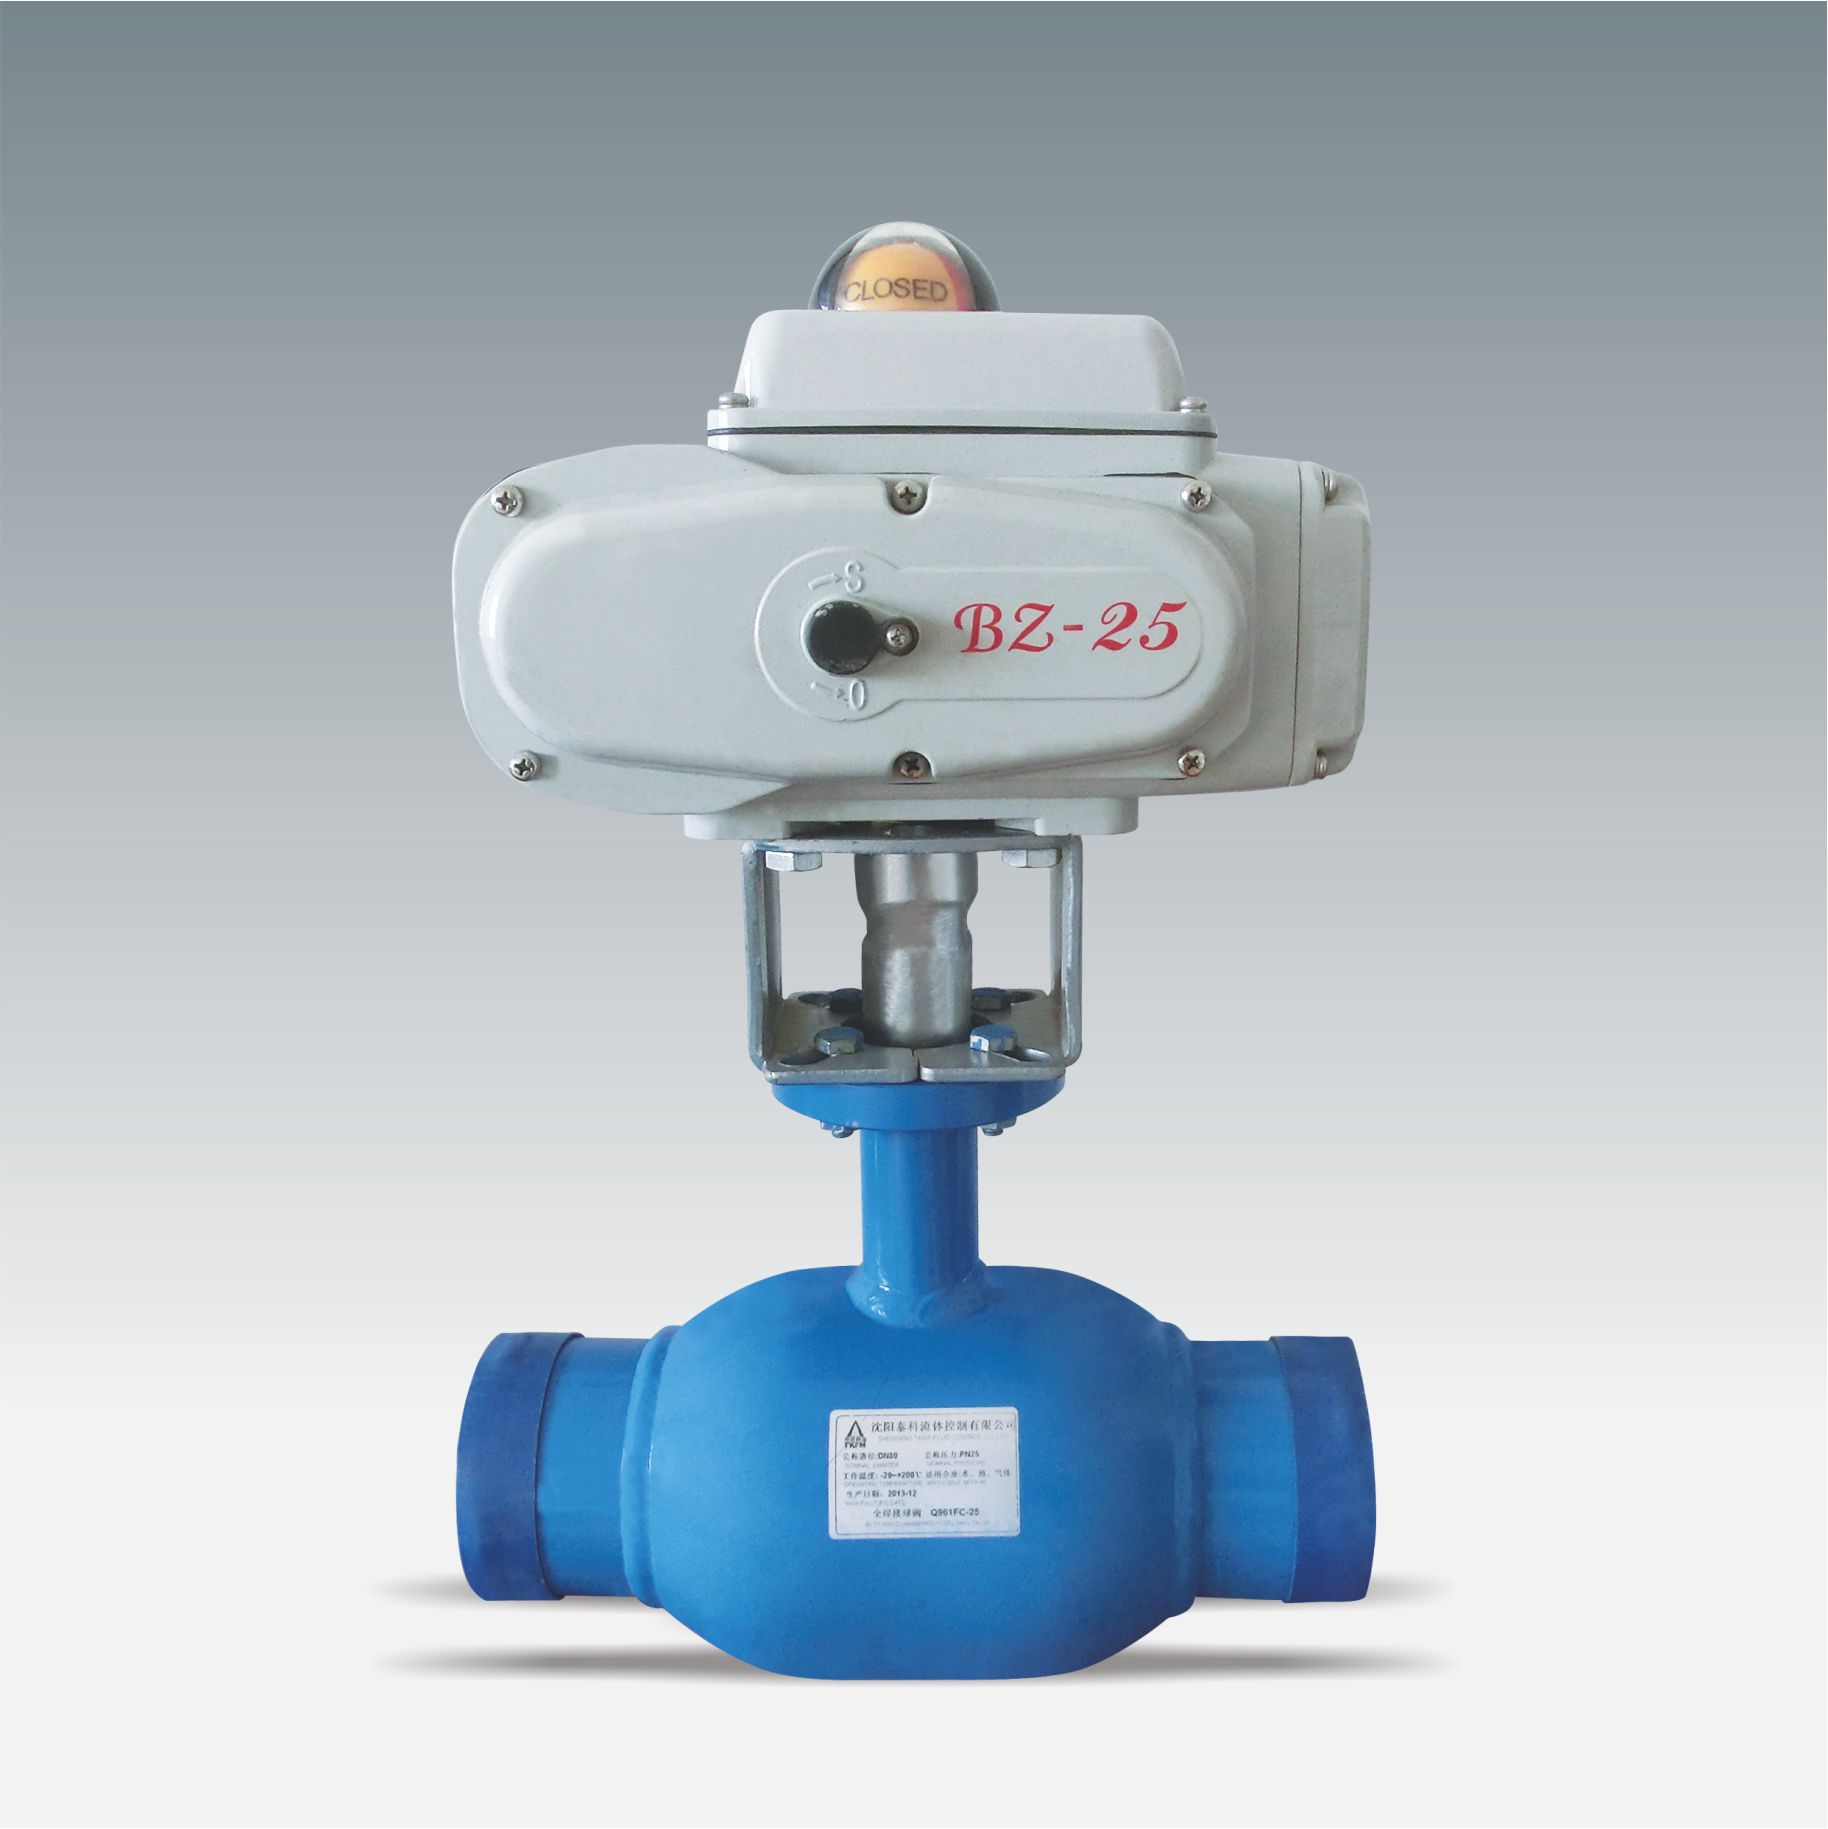  Advantages and disadvantages of ball valve